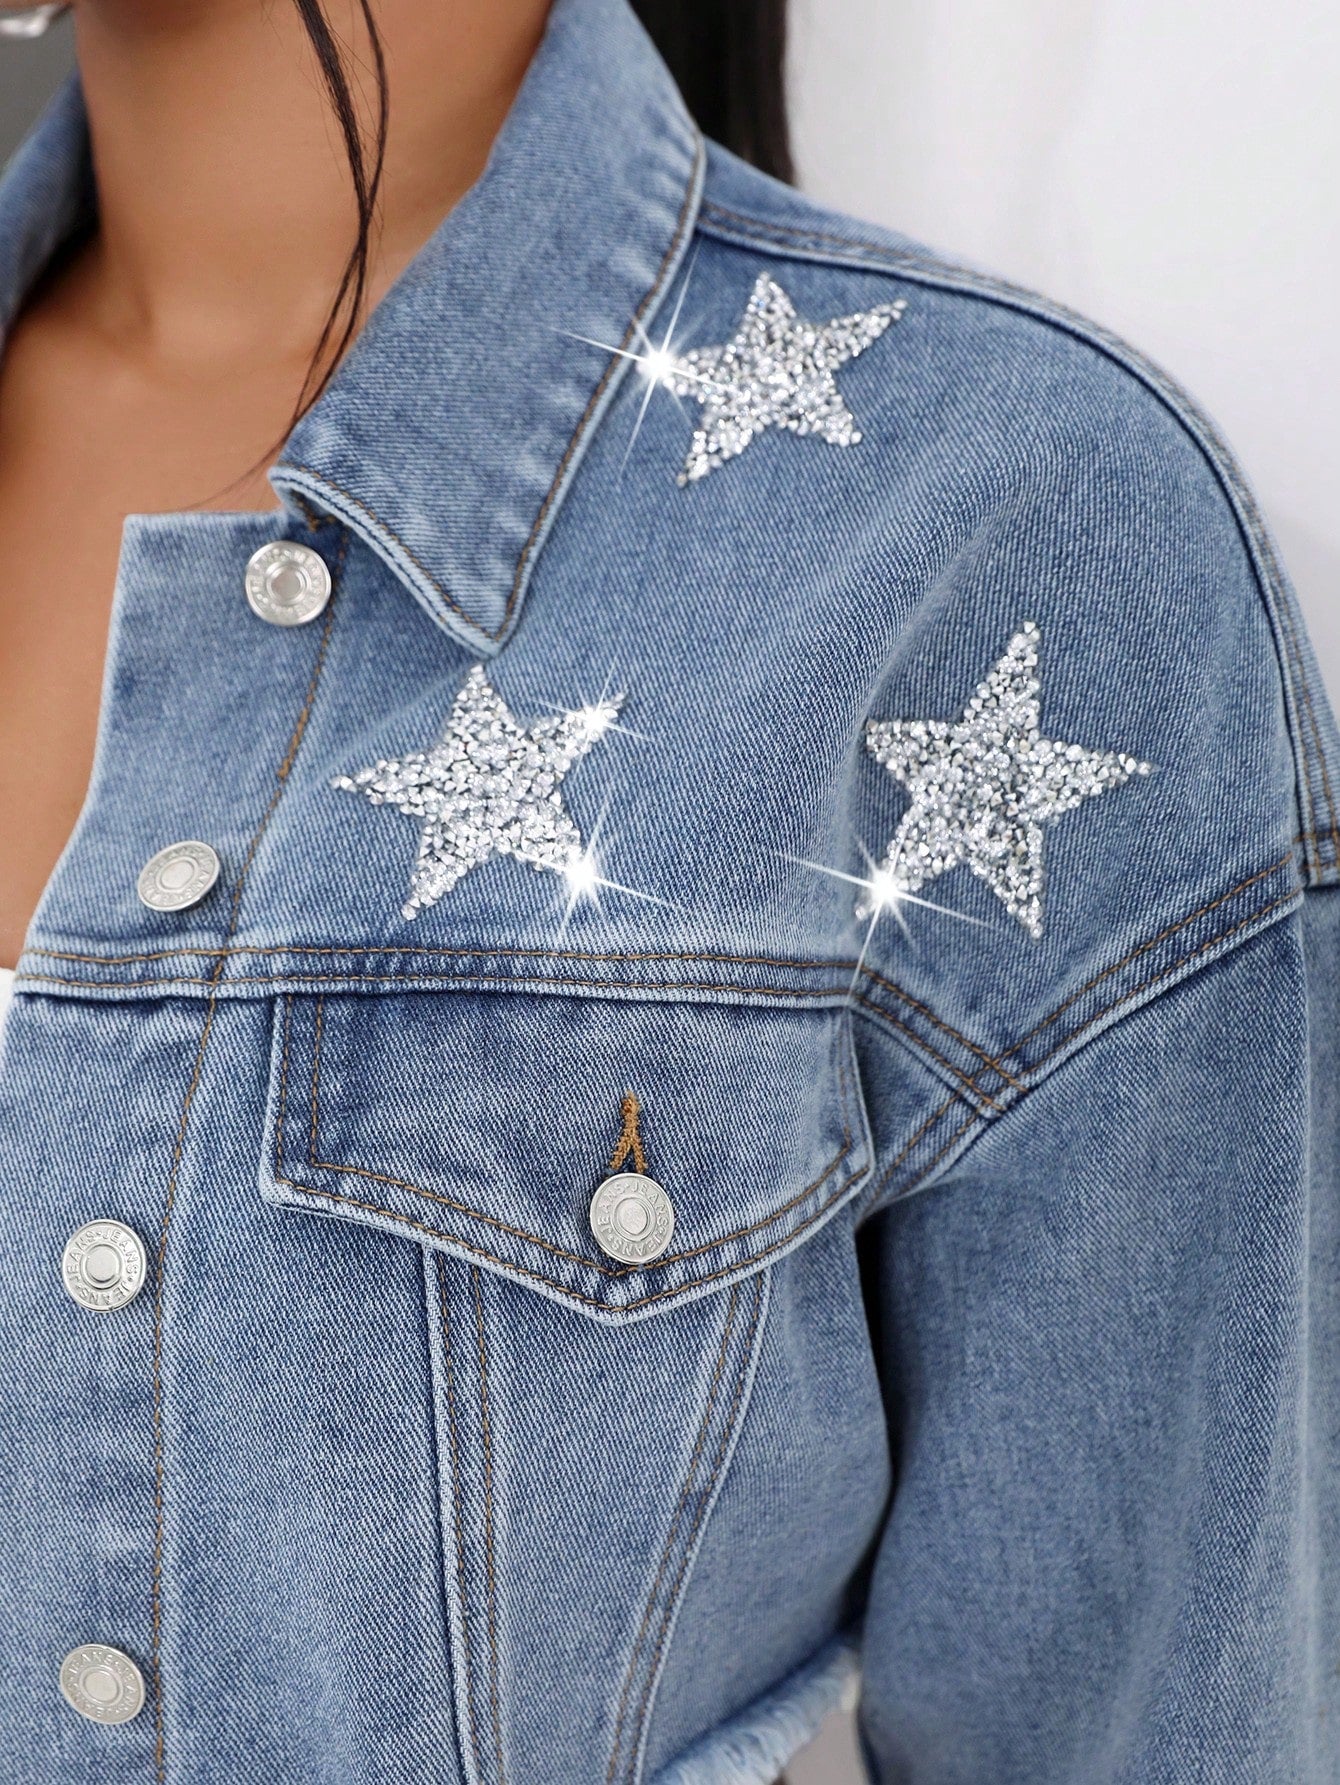 Long sleeve sequined blue jean jackets with strass